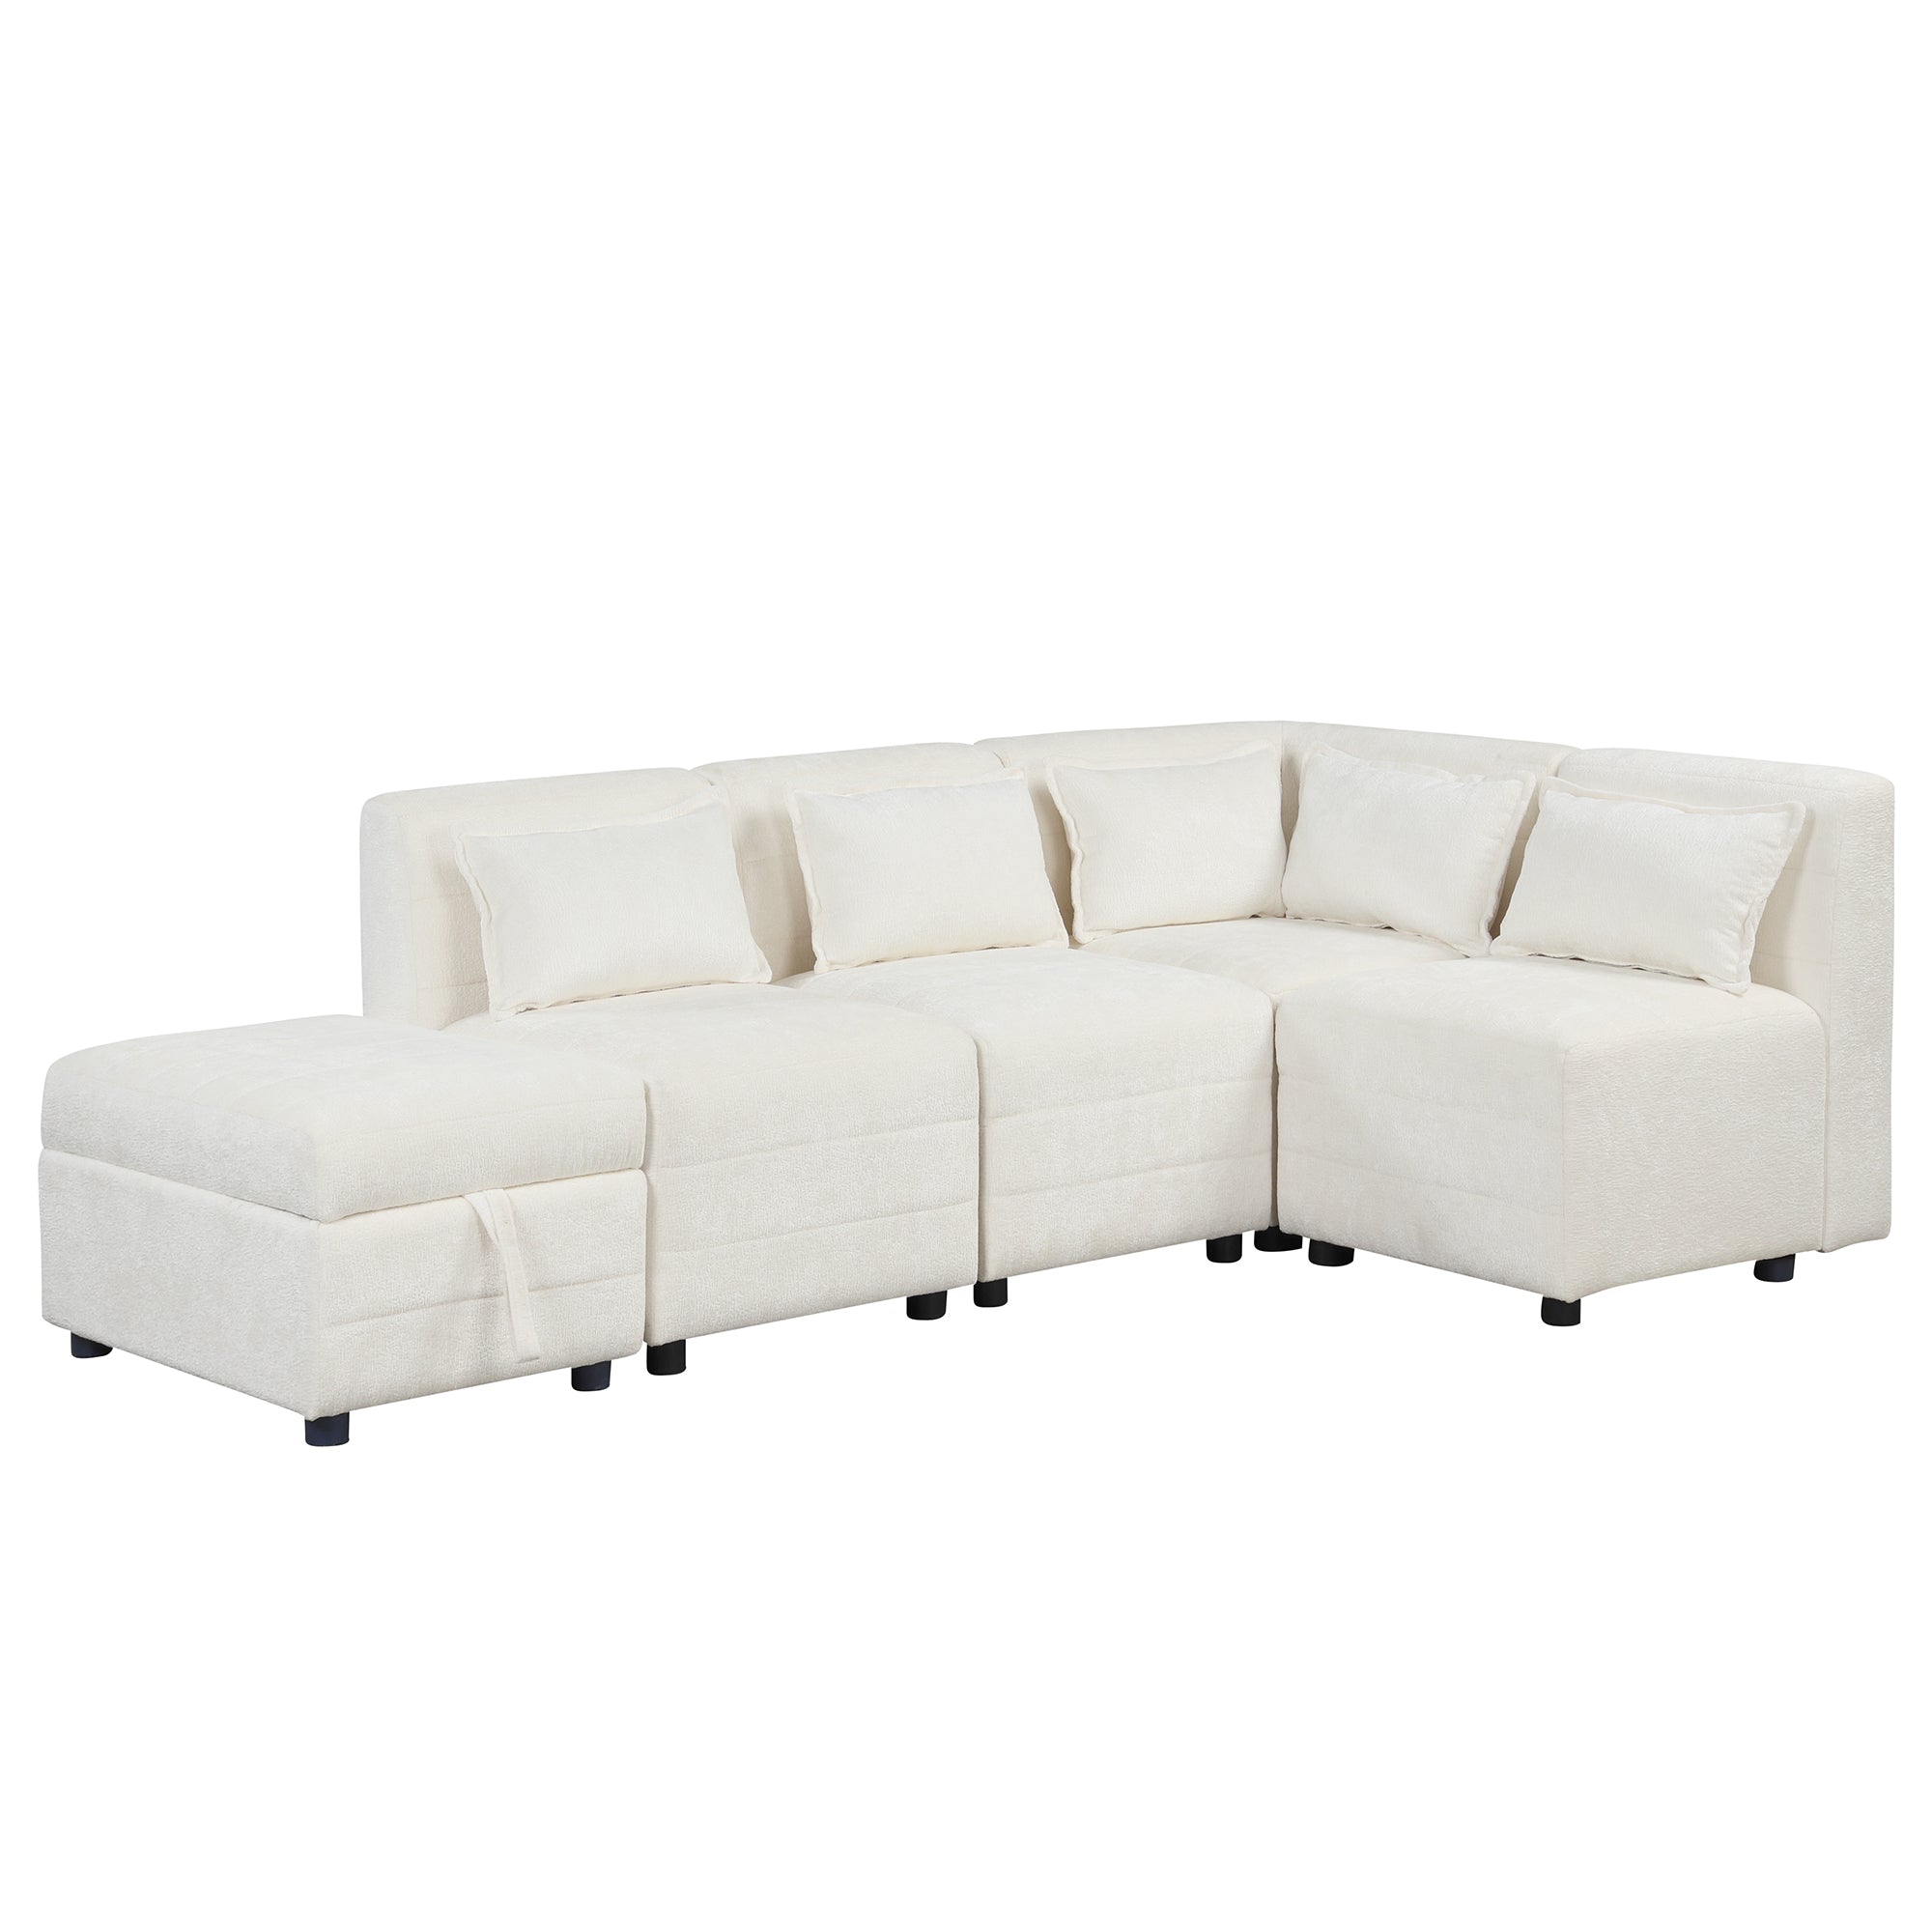 Free-Combined Sectional Sofa 5-seater Modular Couches with Storage - 518a5bba43444232b9684de5311e6543